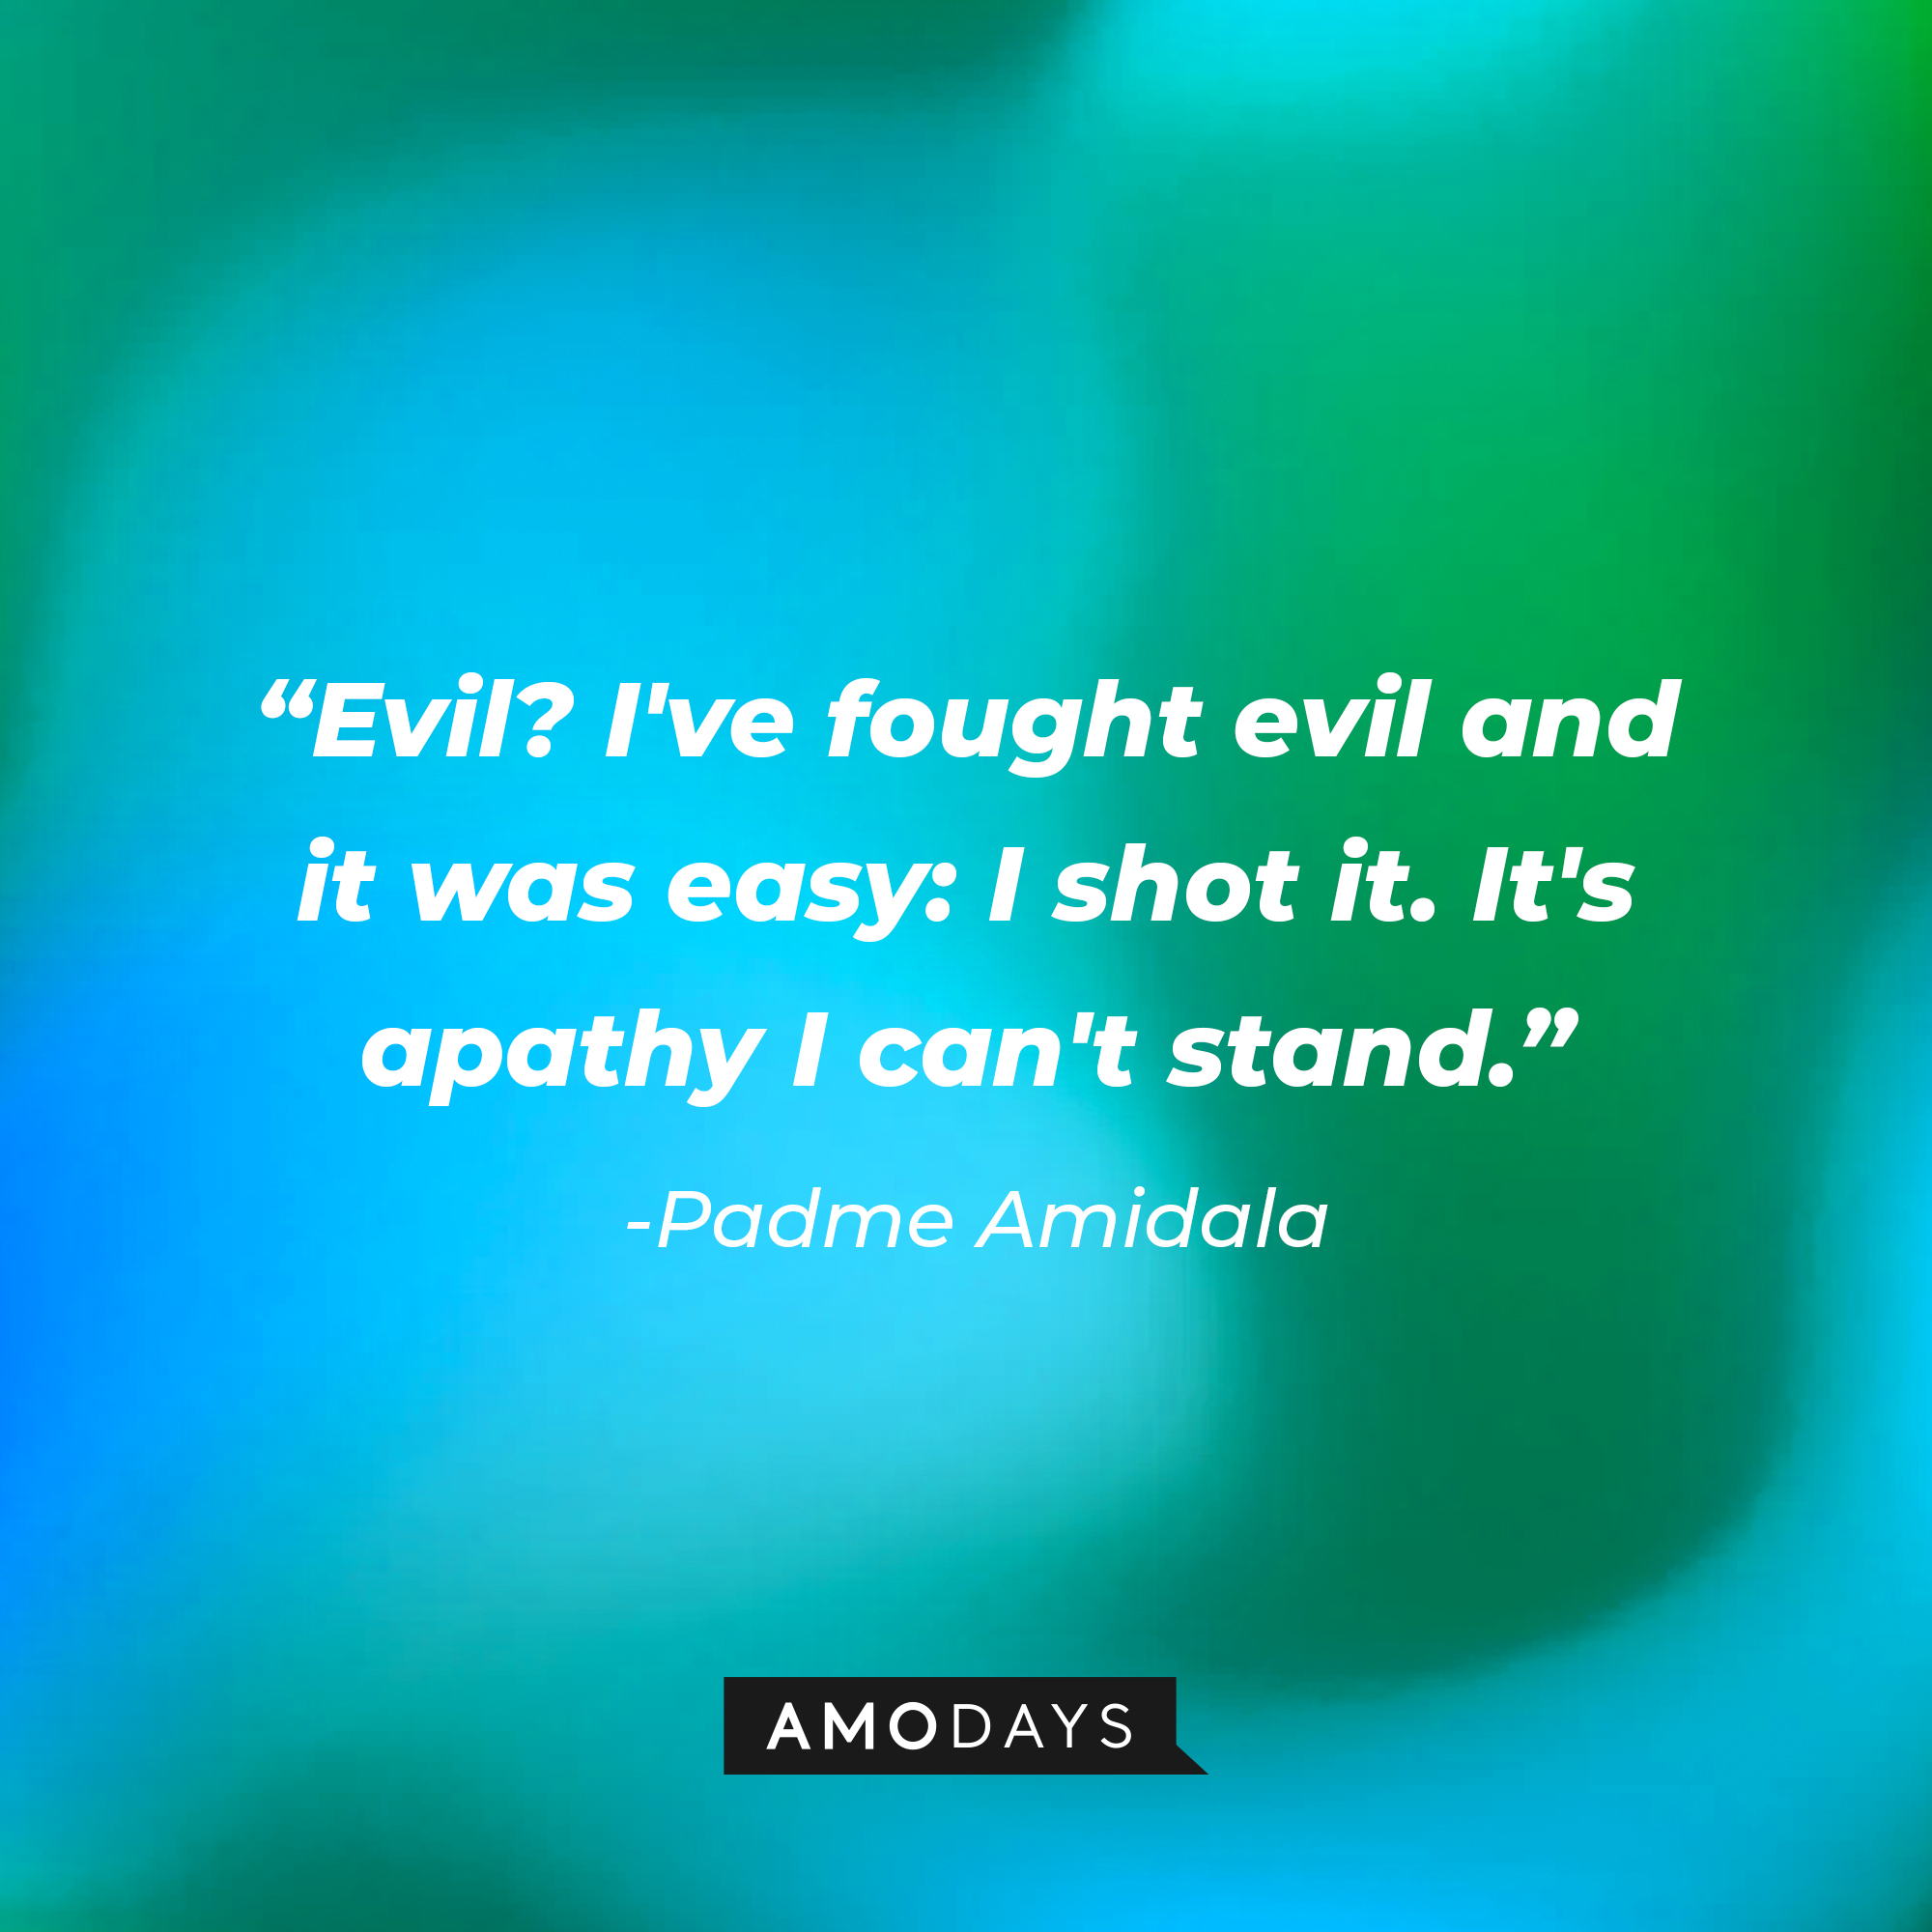 Padme Amidala's quote: "Evil? I've fought evil and it was easy: I shot it. It's apathy I can't stand." | Source: AmoDays